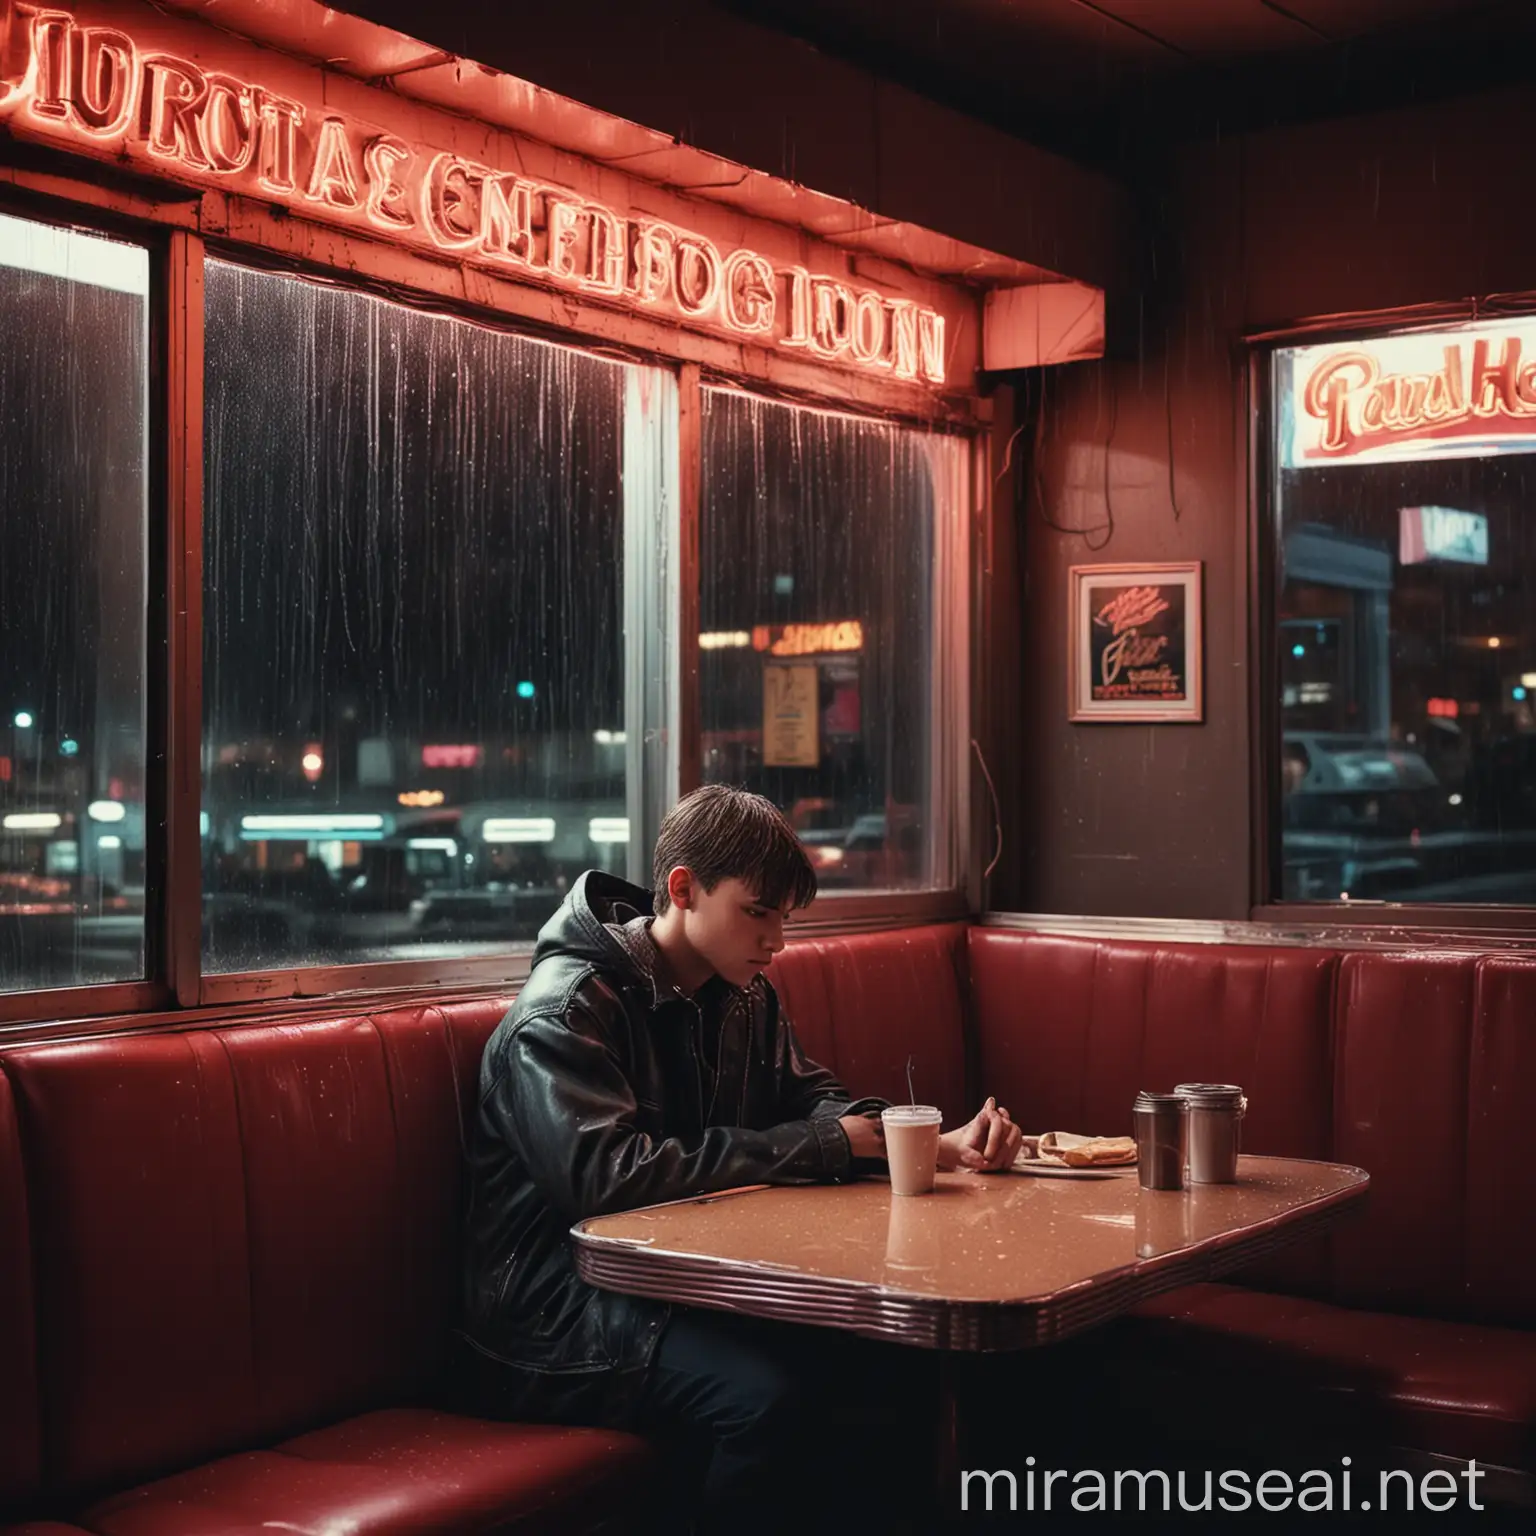 Lonely Teen Boy in 1980s Diner on Rainy Night